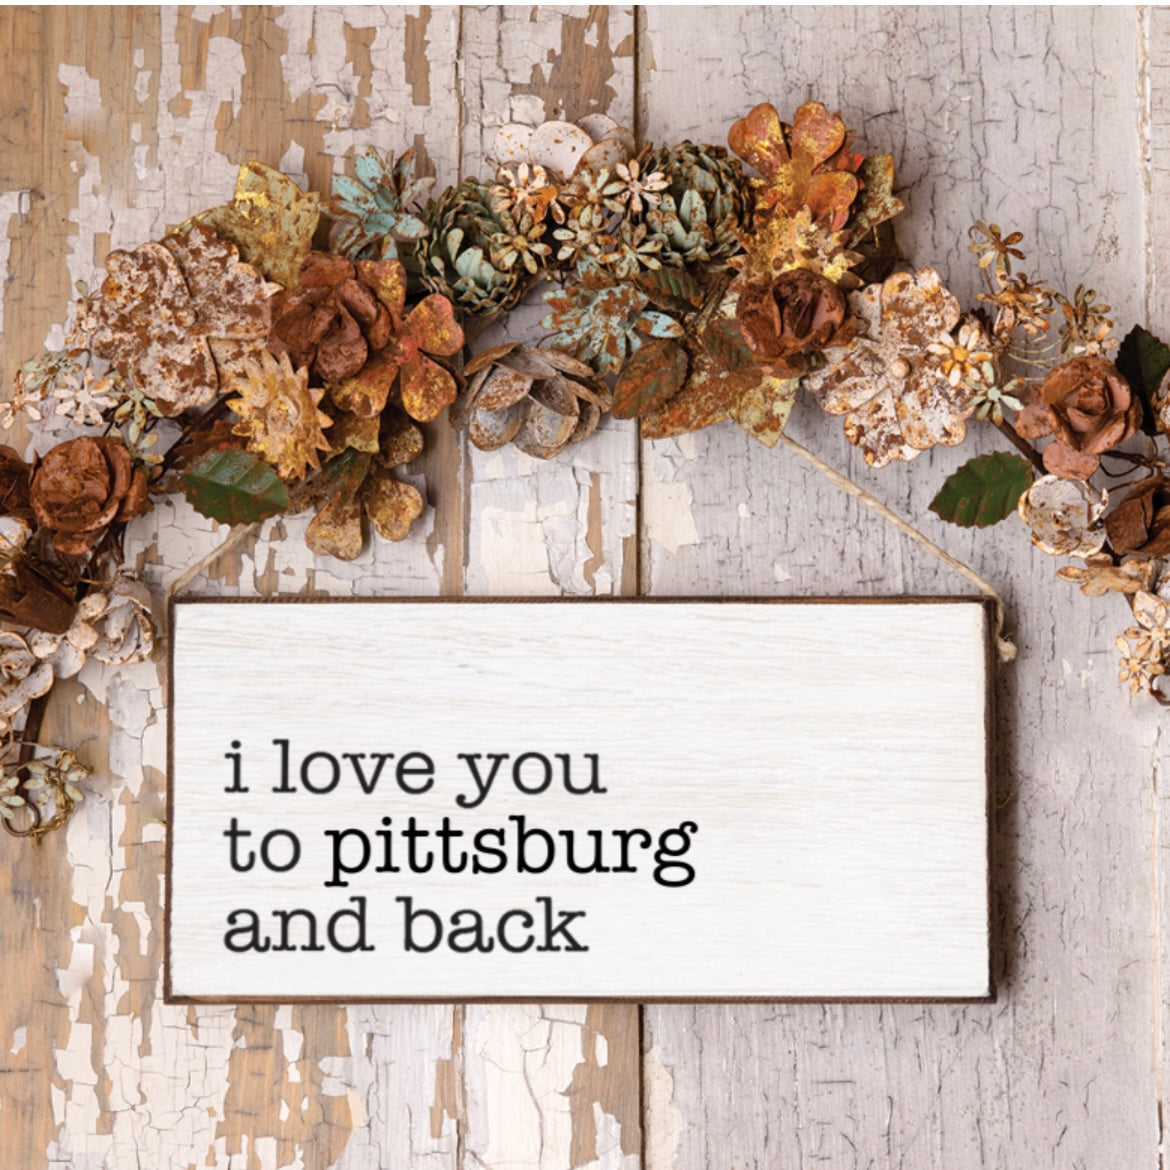 Love You to Pittsburg and Back Twine Hanging Sign